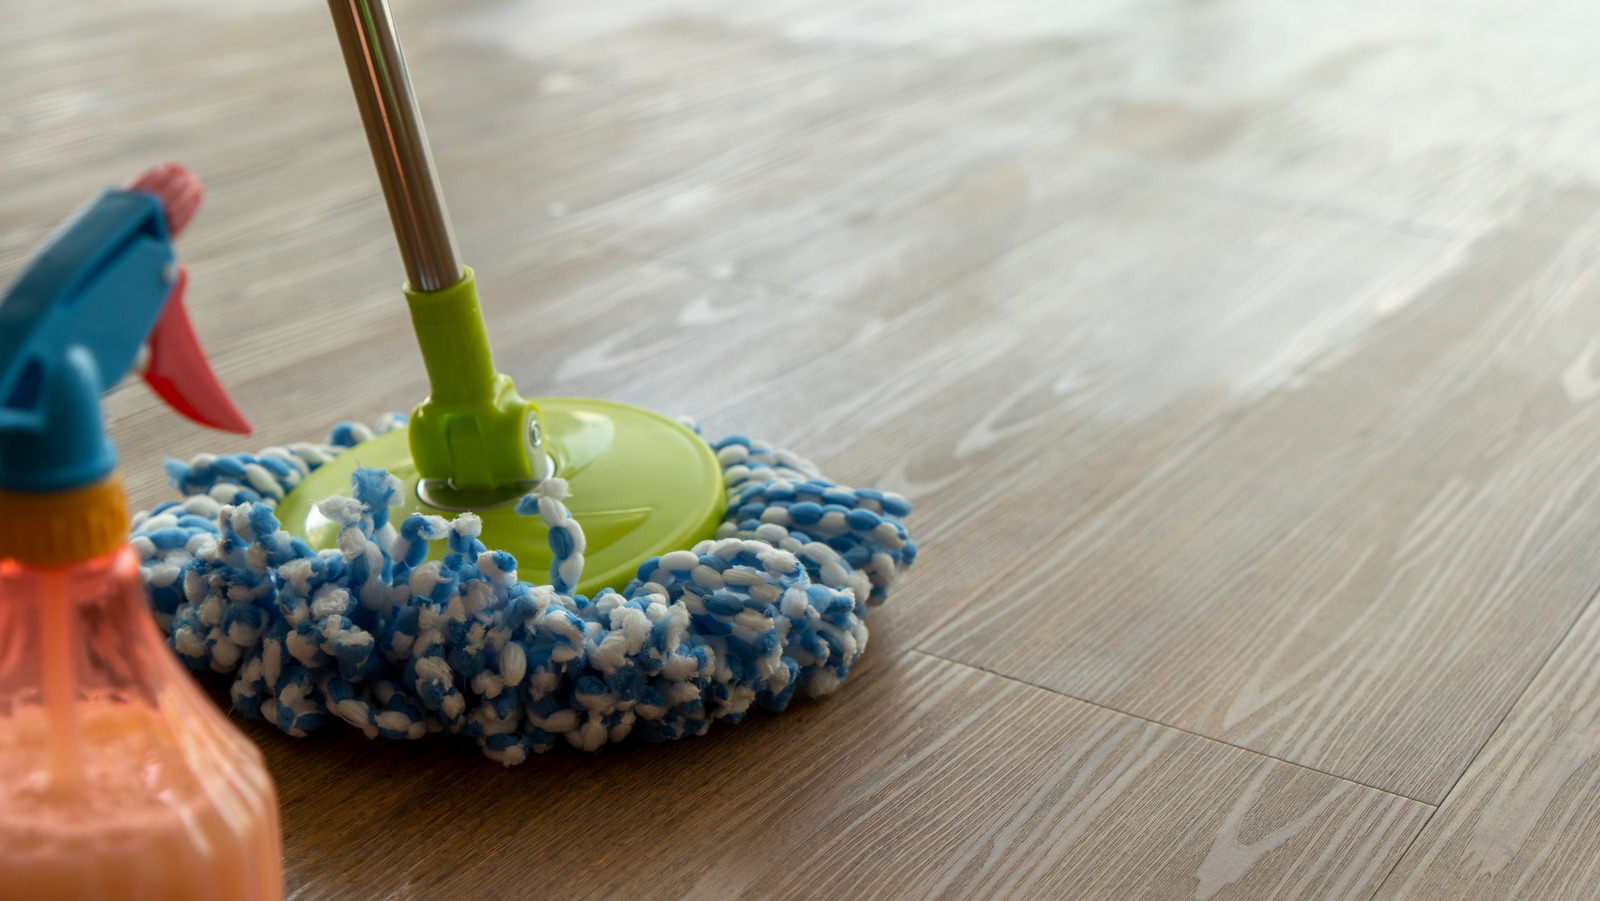 How to Clean Vinyl Plank Flooring and Maintain It